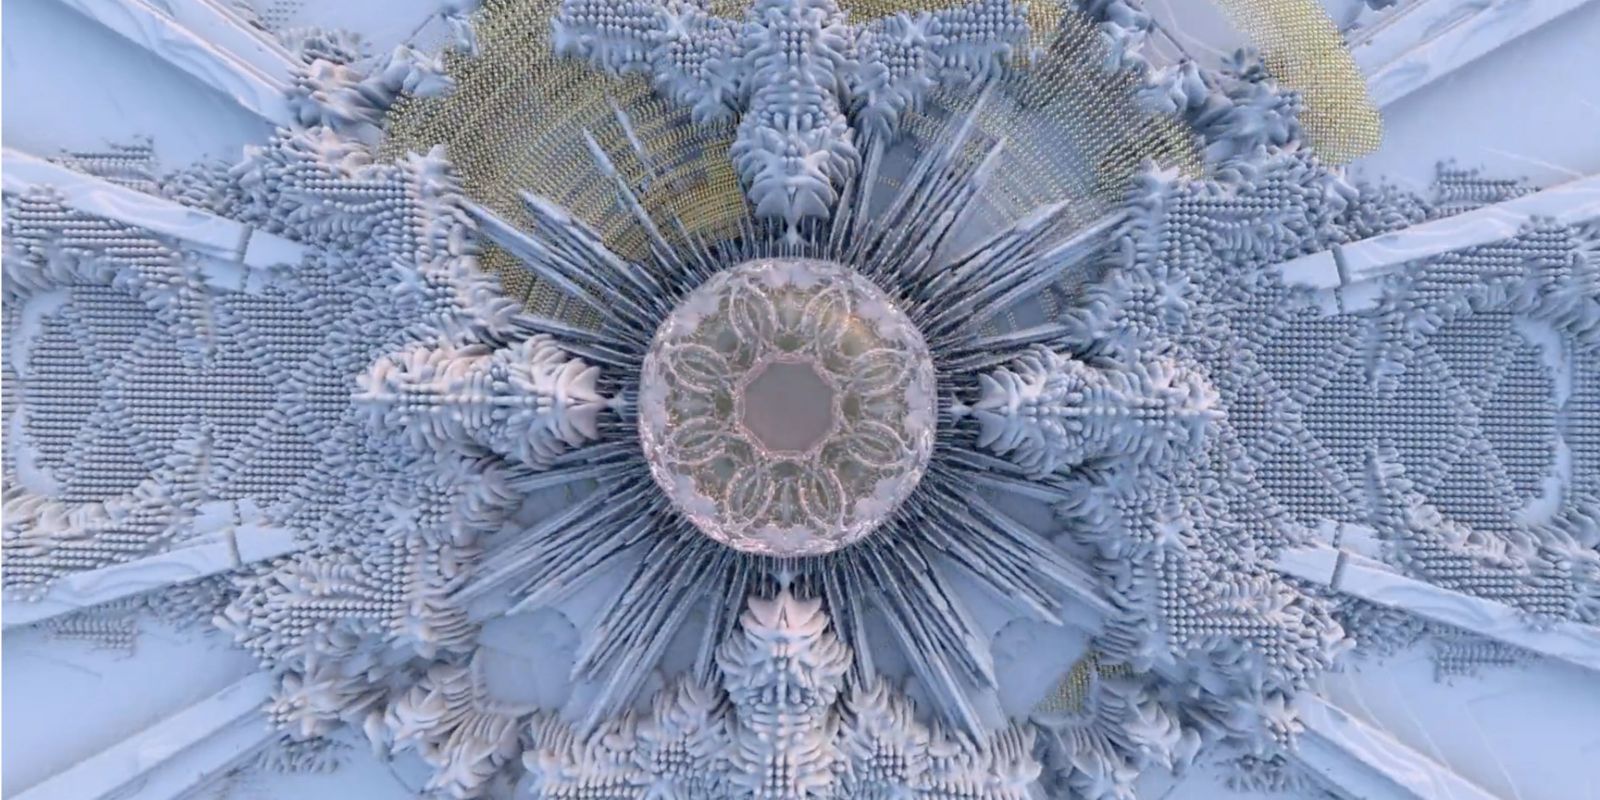 A digitally created fractal-like snowflake – ‘Coral’ by MDT student, Henri Spencer, created using SideFX Houdini software.